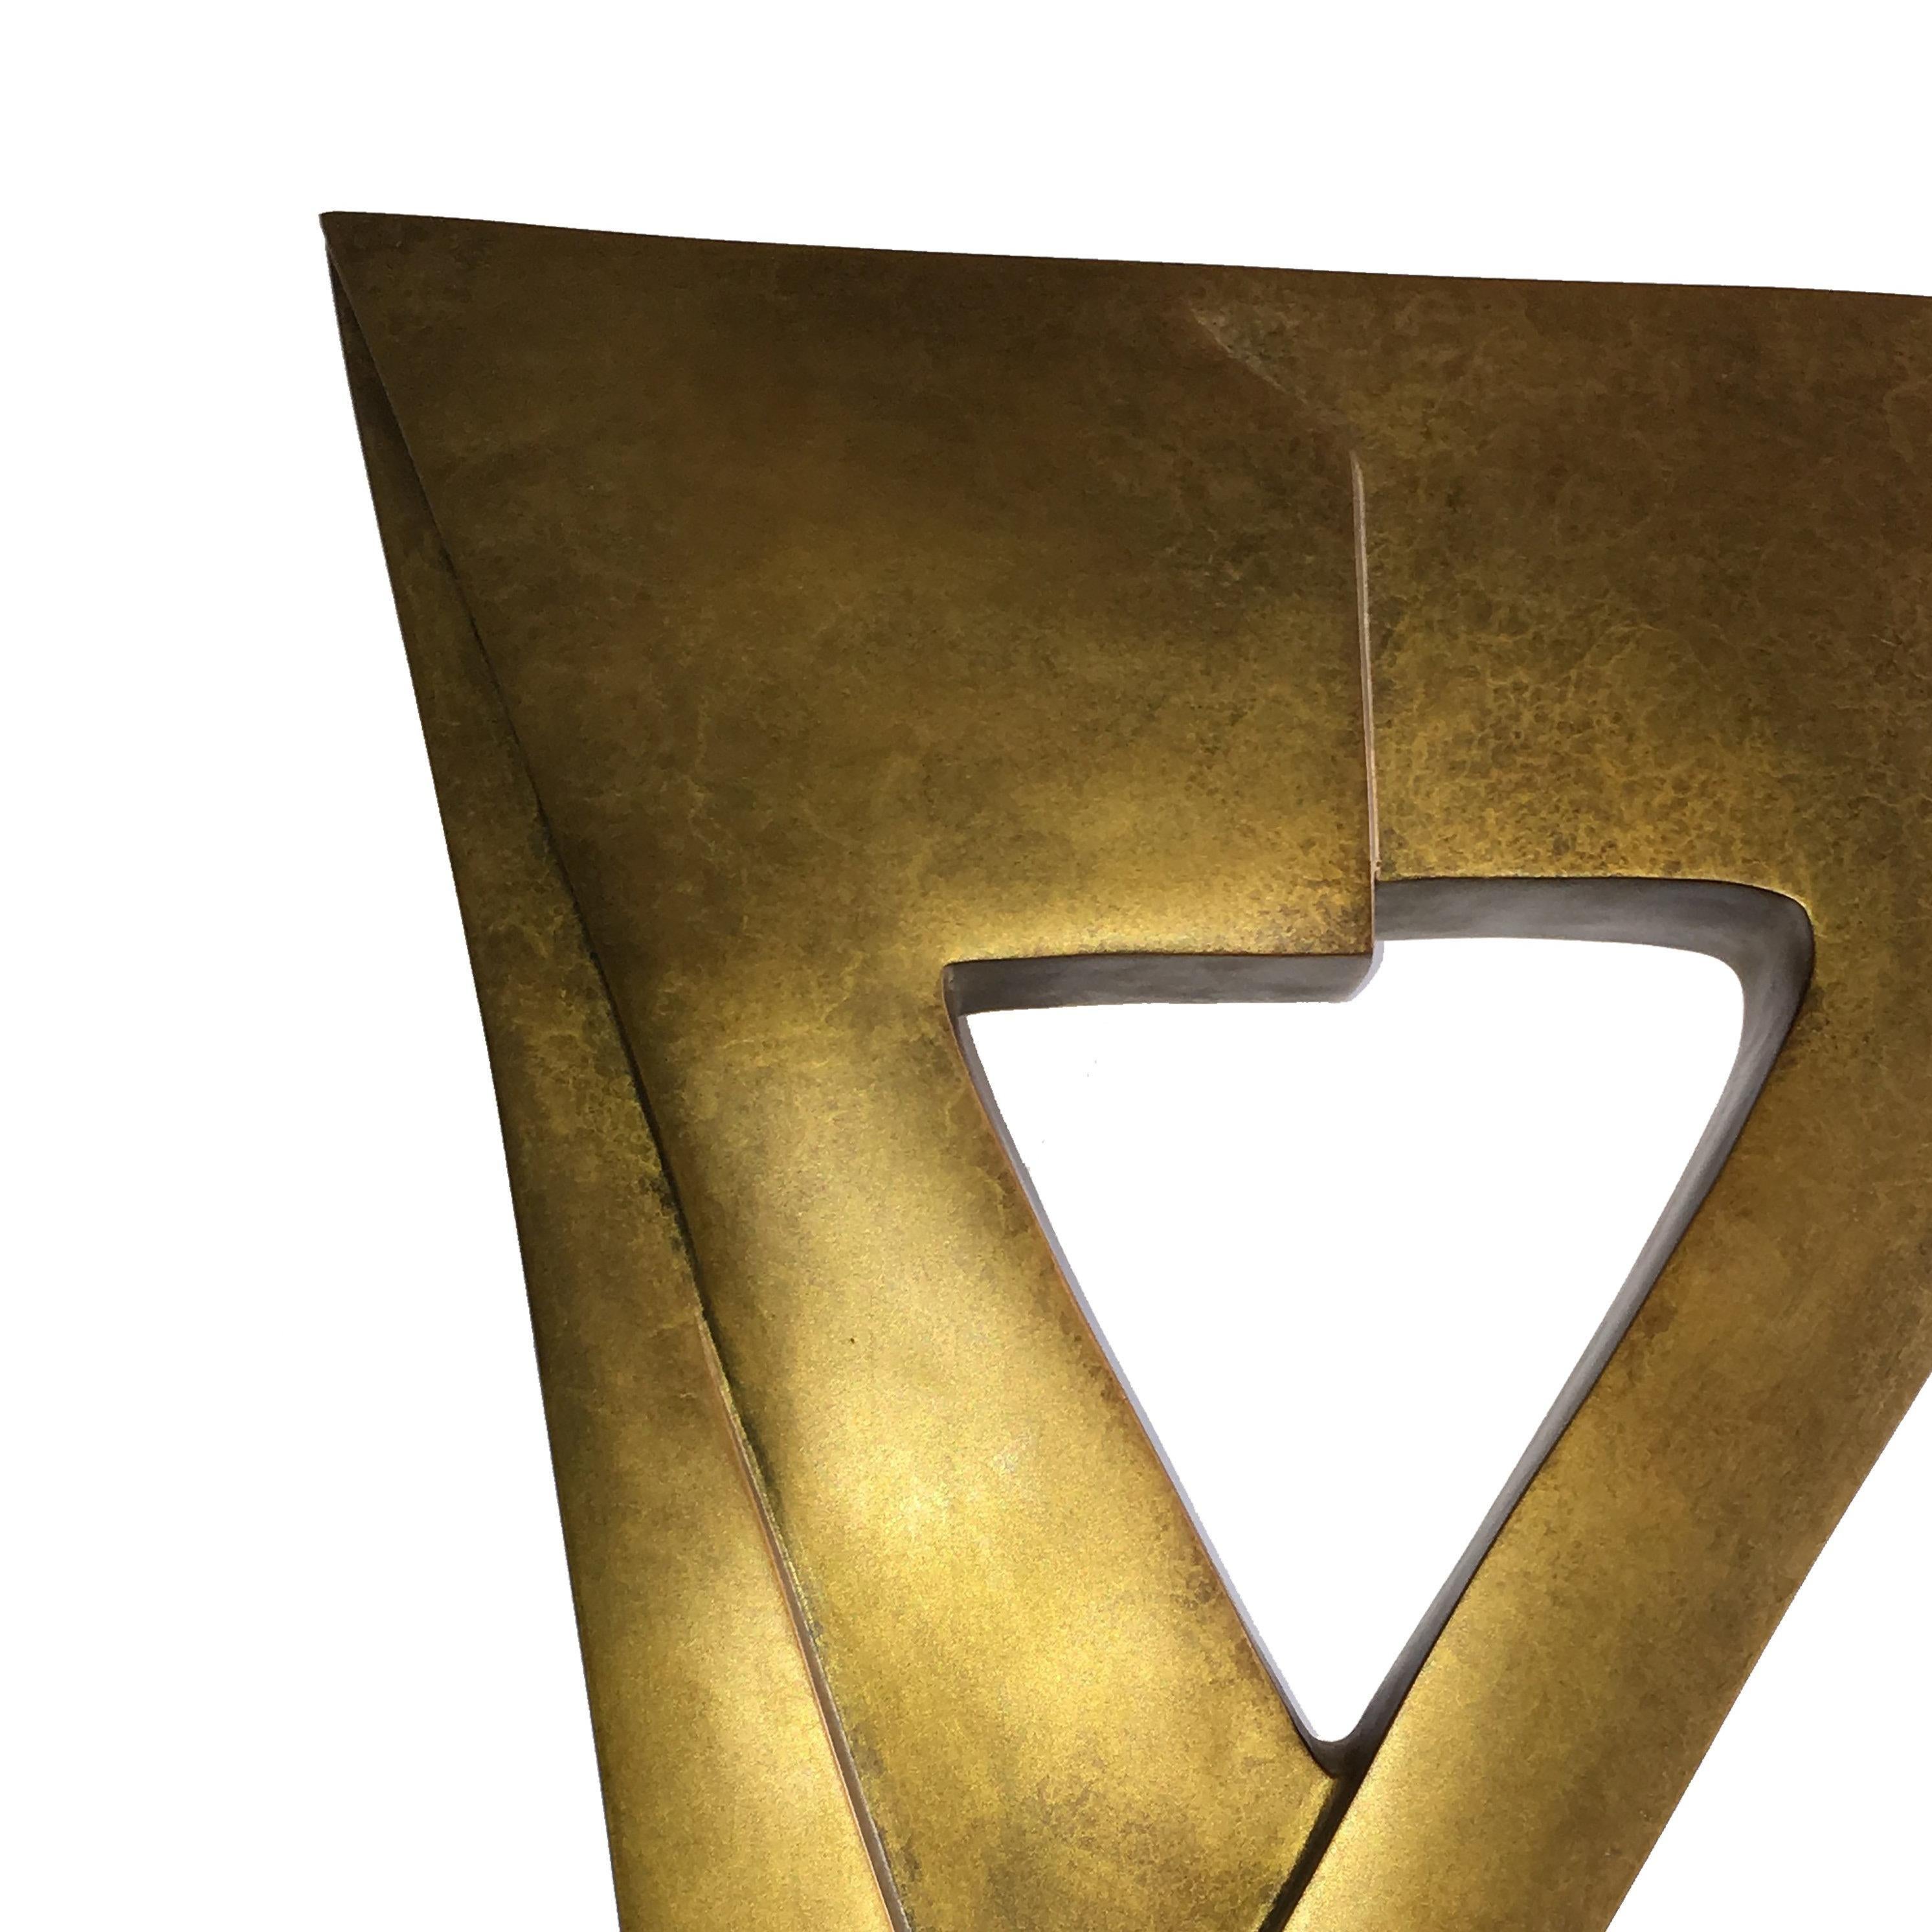 Her Kiss beautiful contemporary abstract sculpture gold - Abstract Sculpture by Catherine Bohrman